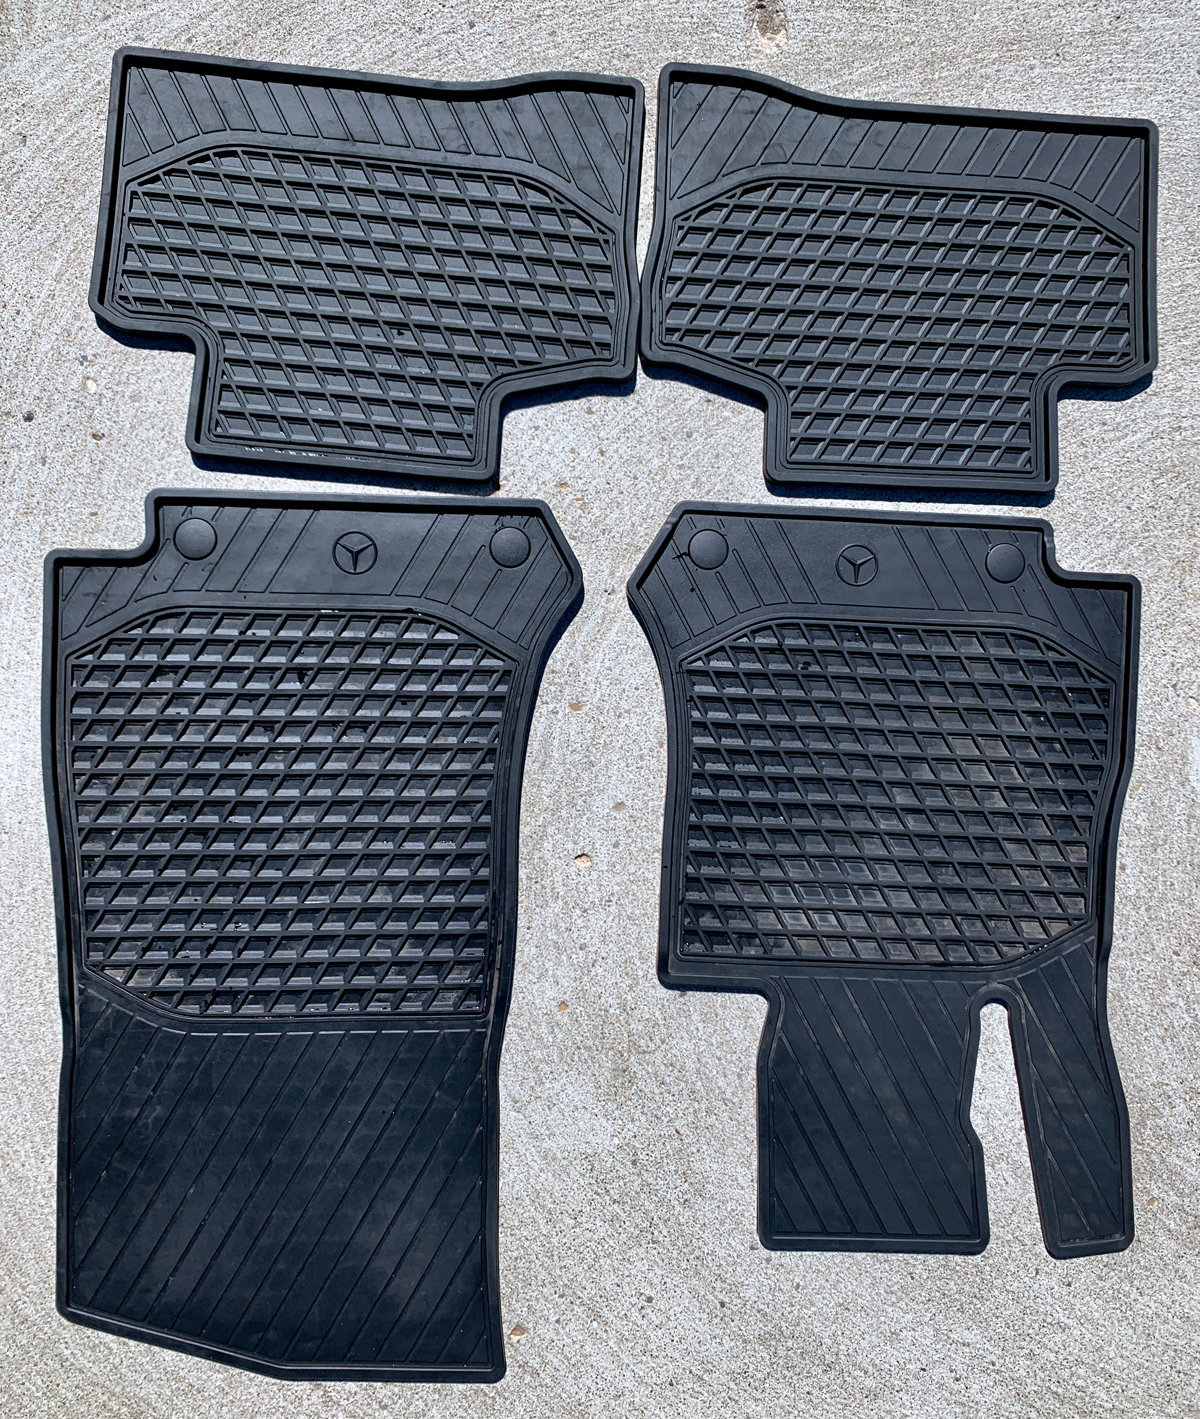 MercedesBenz OEM All Weather Floor Mats 2016 to 2019 GLCClass SUV Set of 4 Forums